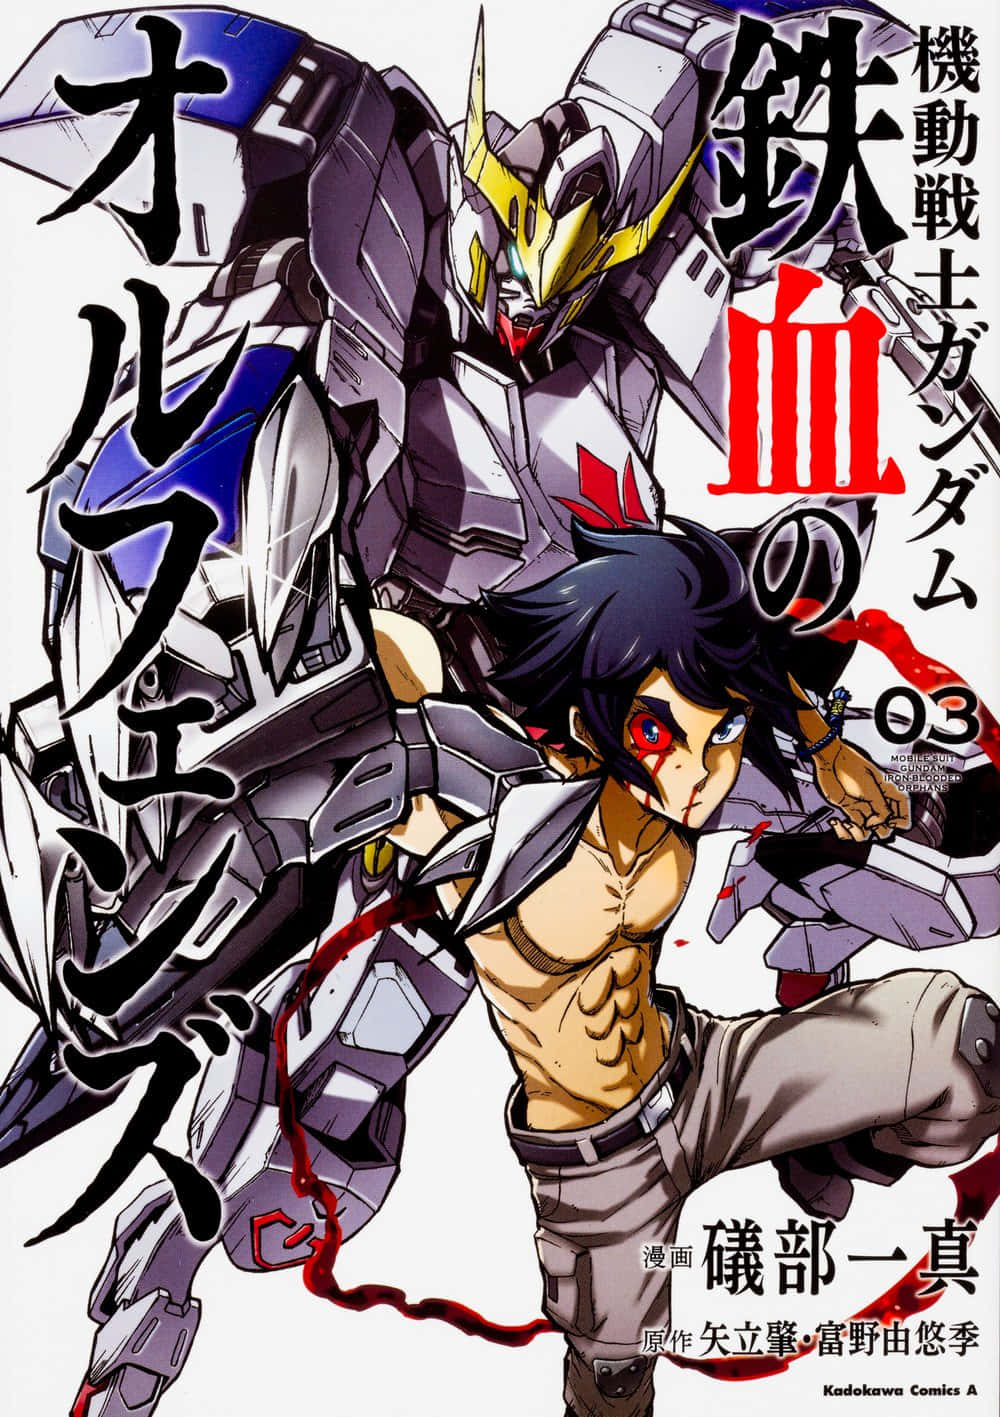 Taking On The World in Mobile Suit Gundam Iron-blooded Orphans Wallpaper